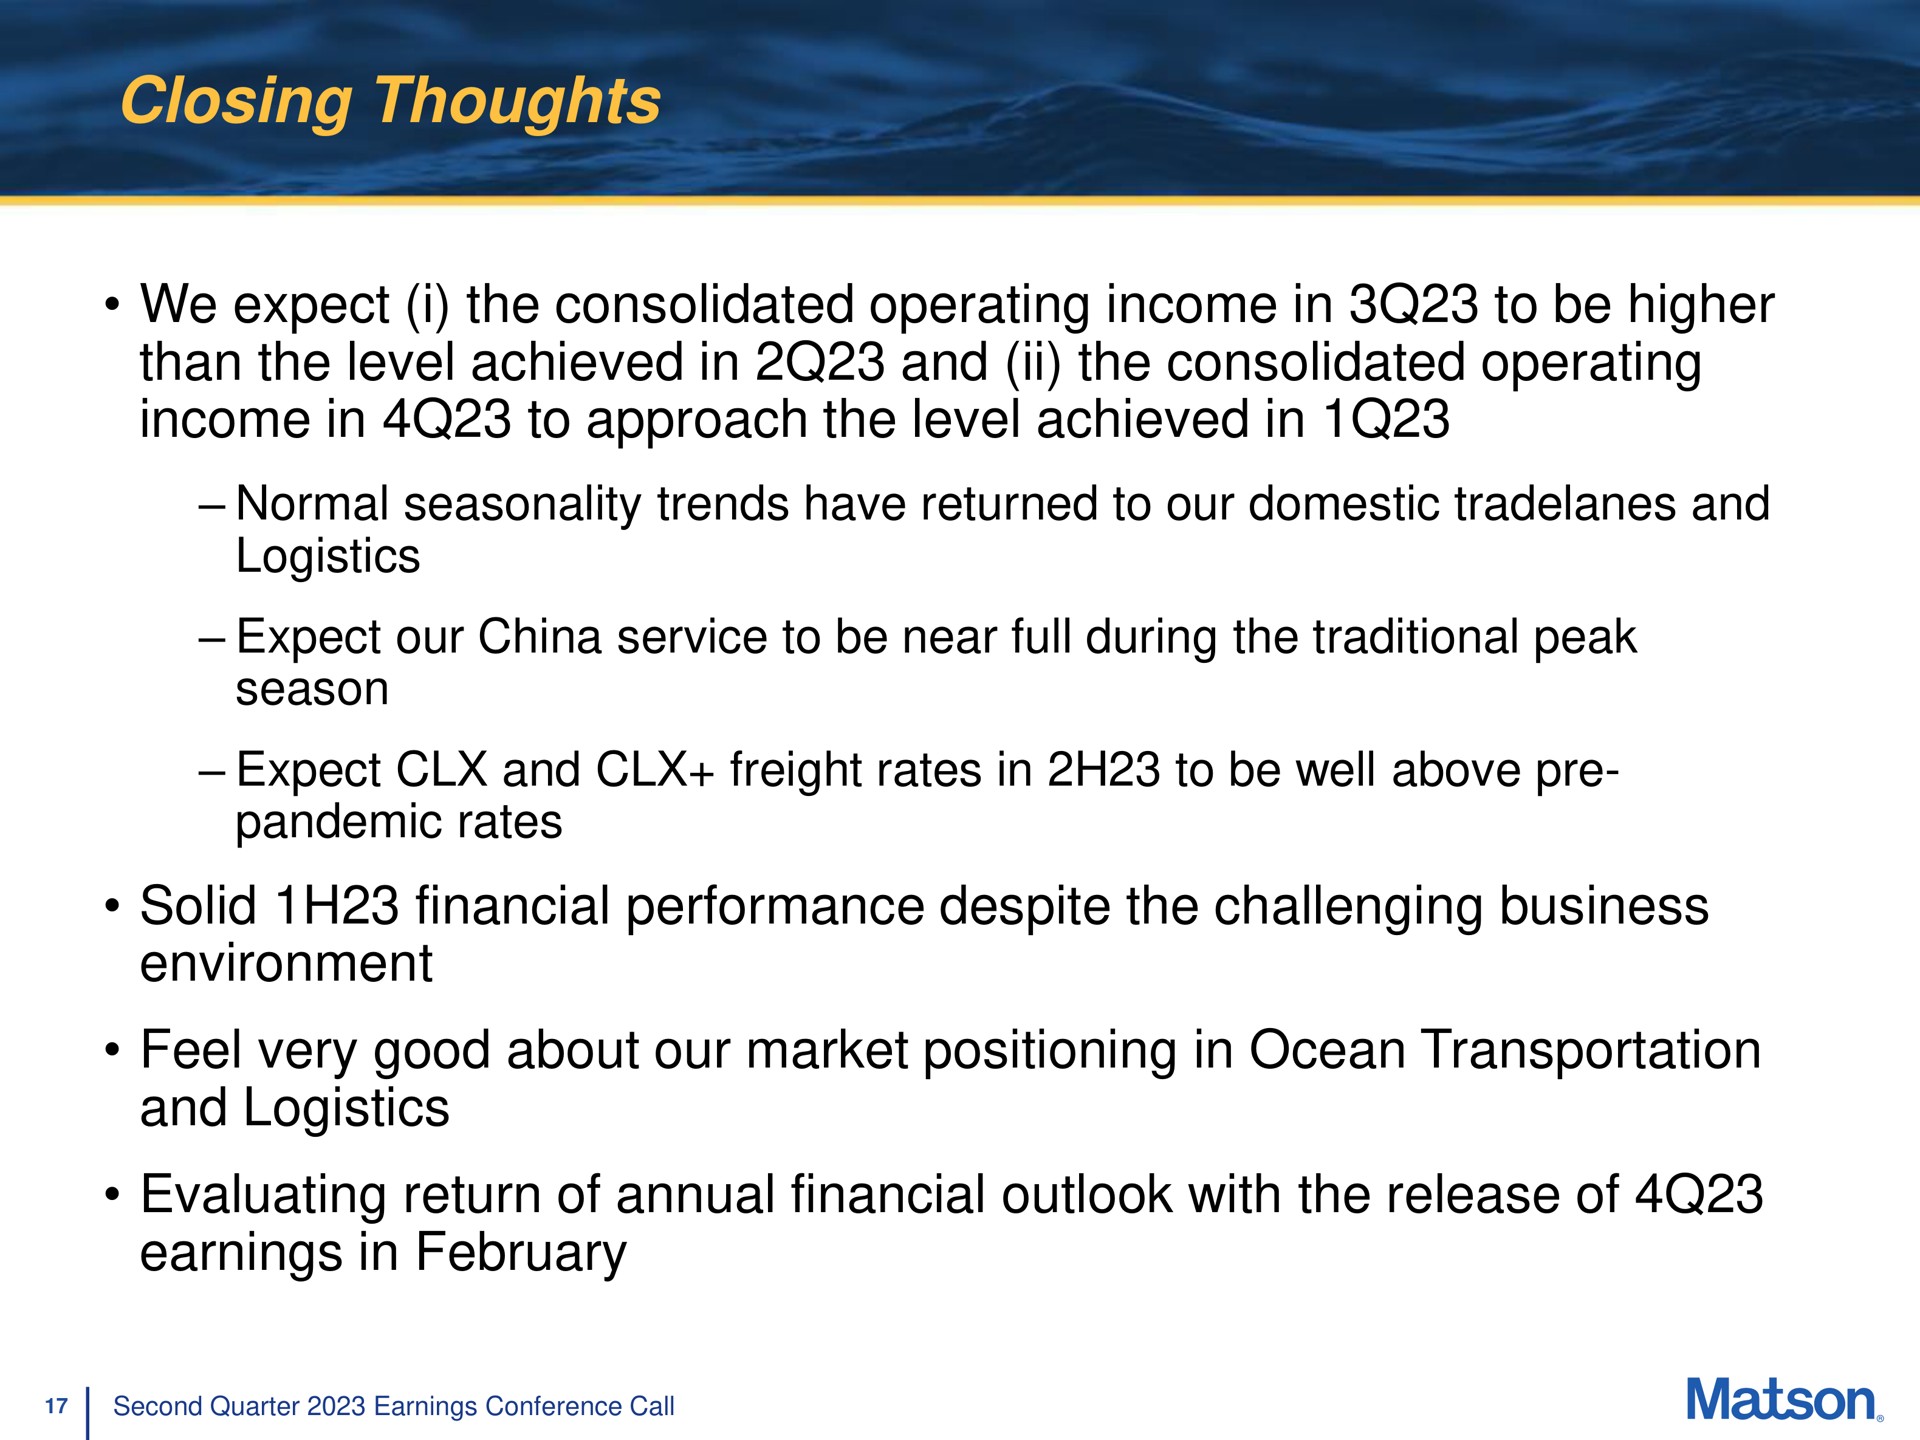 closing thoughts we expect i the consolidated operating income in to be higher than the level achieved in and the consolidated operating income in to approach the level achieved in normal seasonality trends have returned to our domestic and logistics expect our china service to be near full during the traditional peak season expect and freight rates in to be well above pandemic rates solid financial performance despite the challenging business environment feel very good about our market positioning in ocean transportation and logistics evaluating return of annual financial outlook with the release of earnings in | Matson